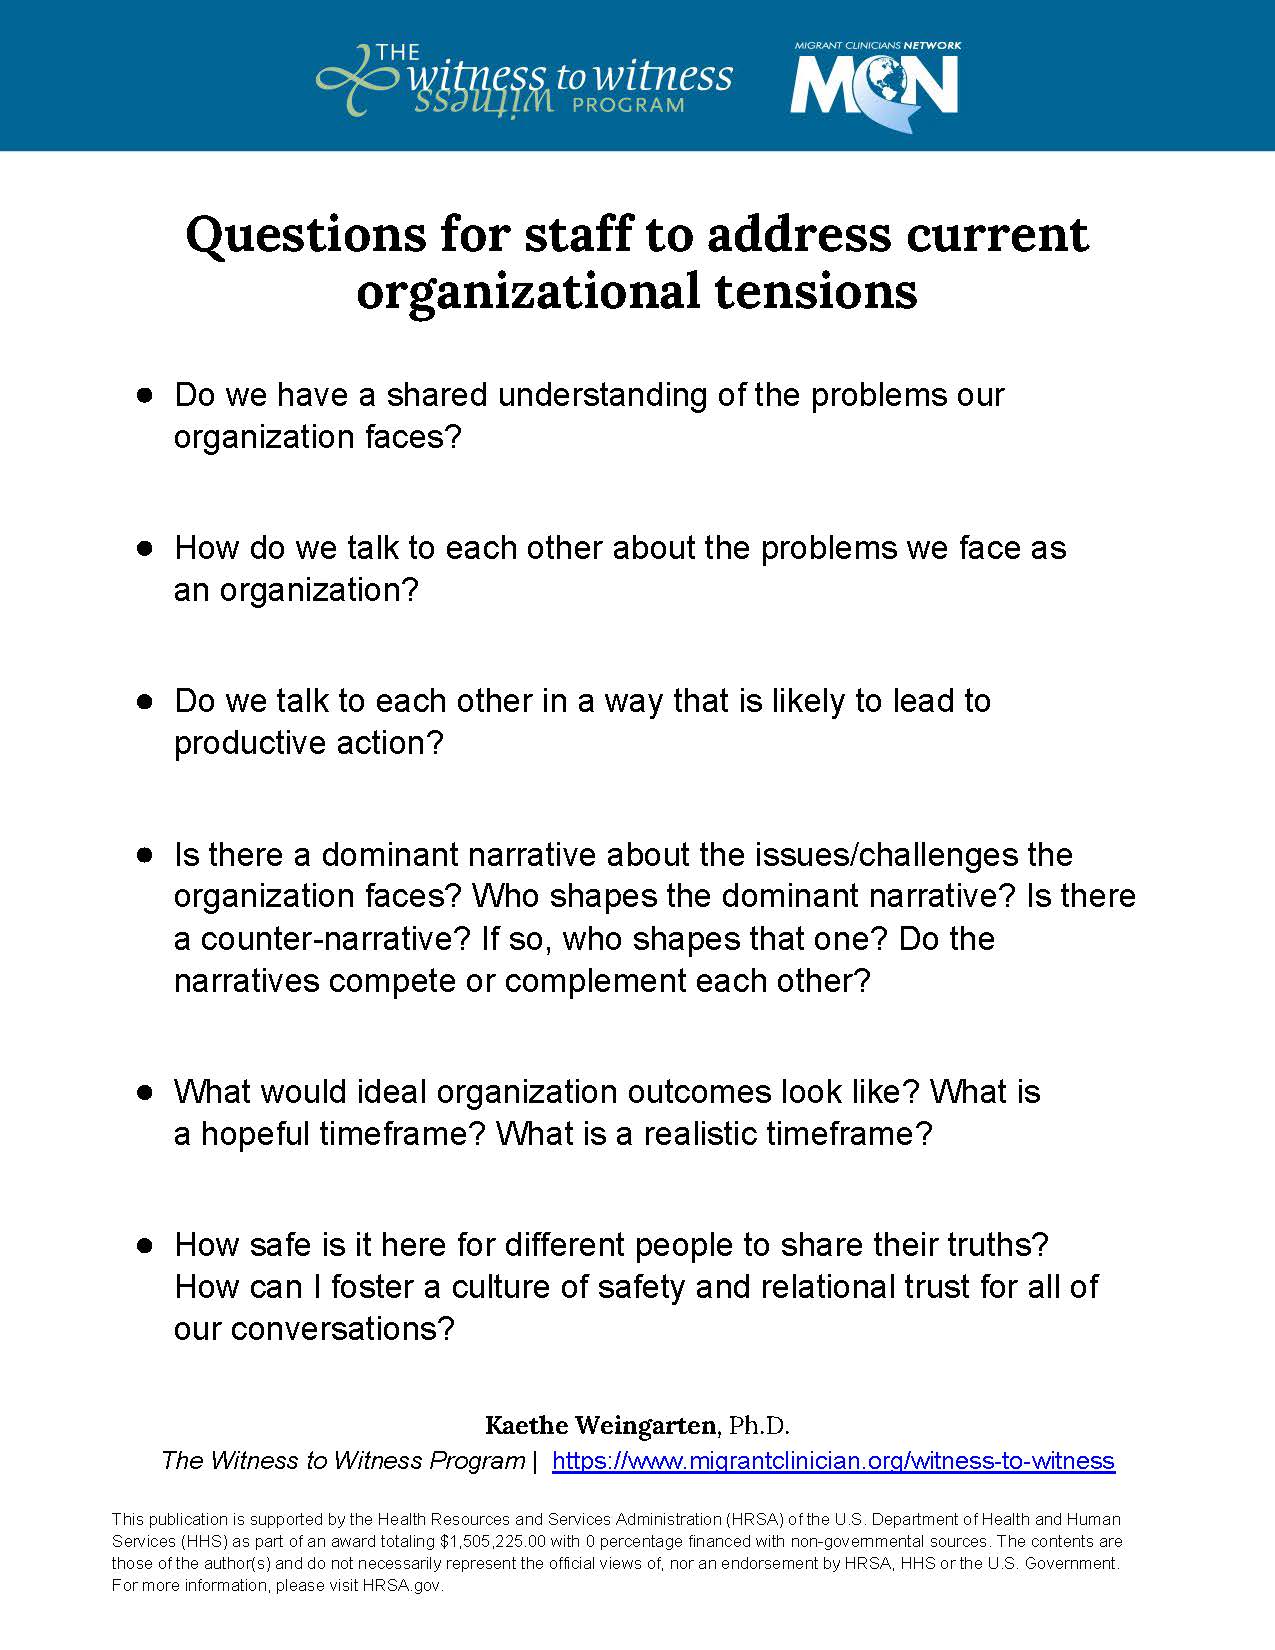 Questions for staff to address current organizational tensions